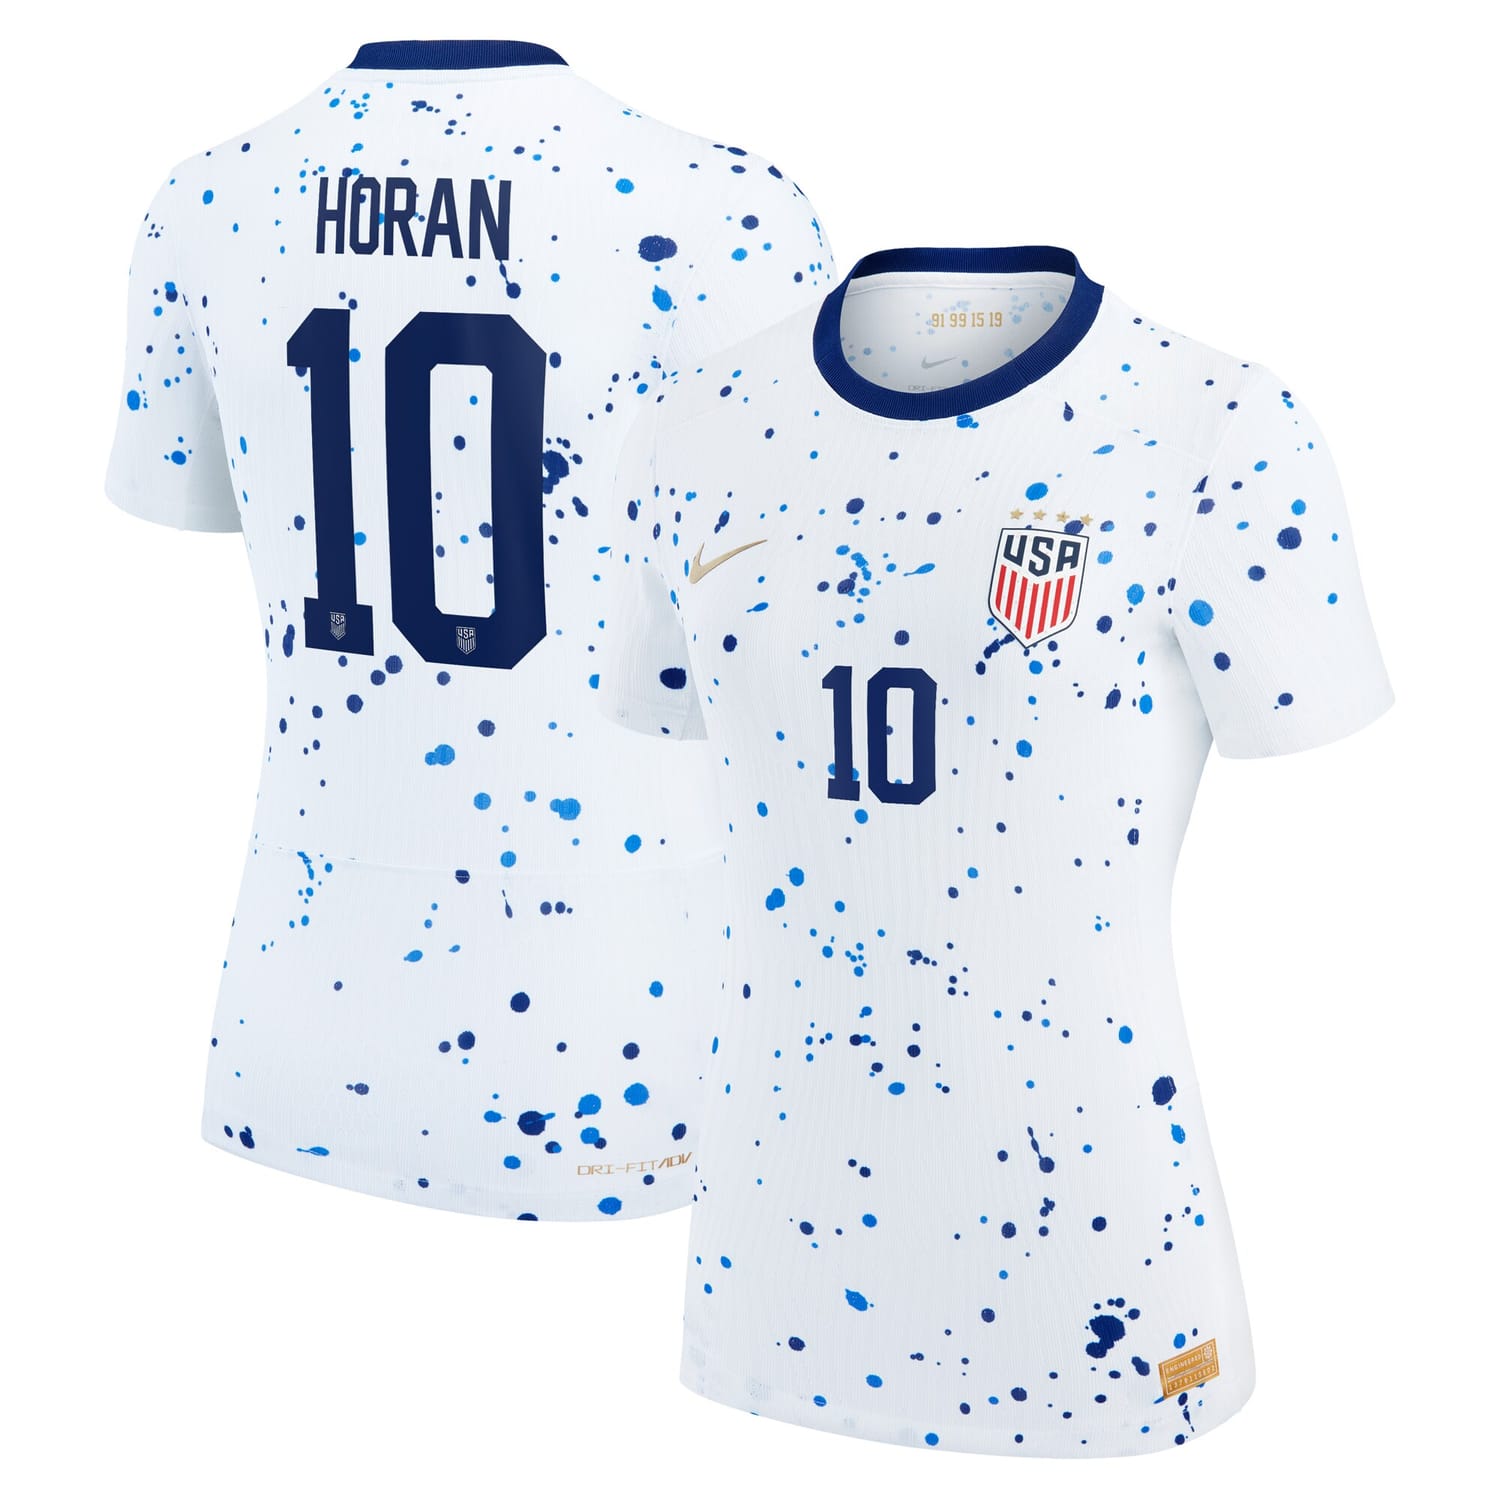 USWNT Home Authentic Jersey Shirt White 2023 player Lindsey Horan printing for Women